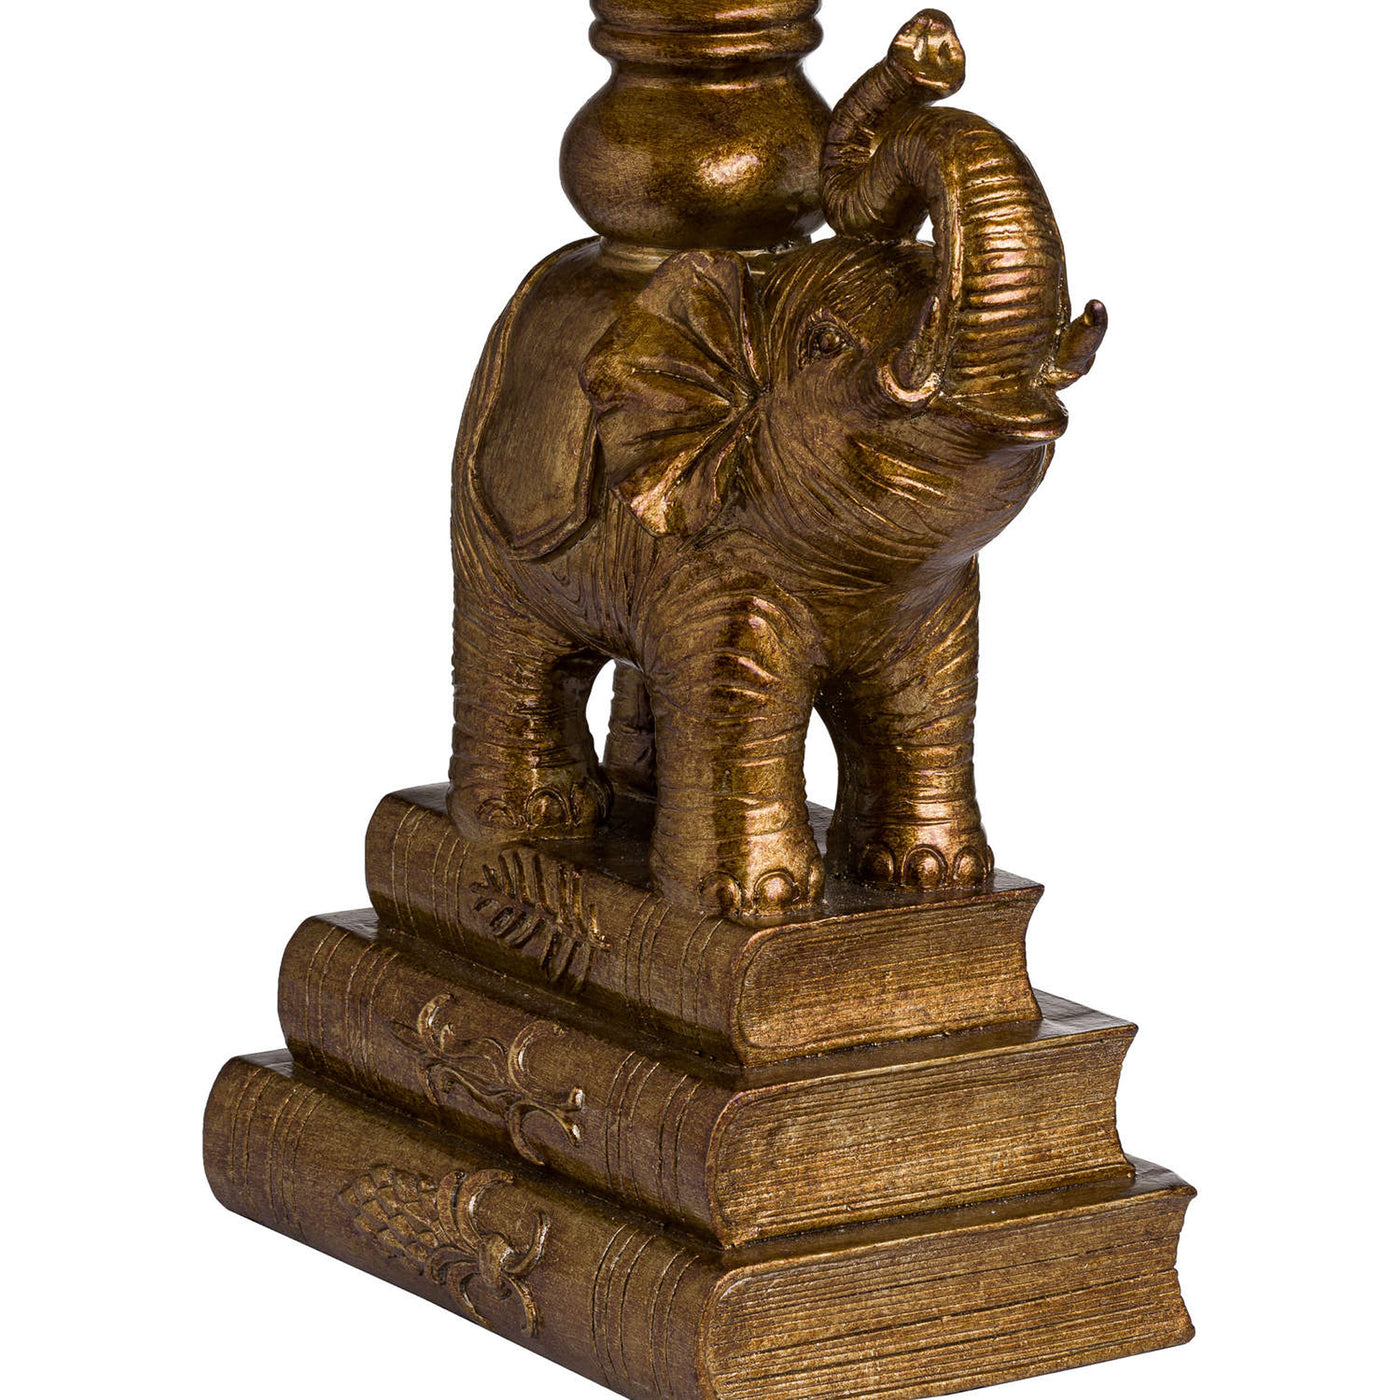 Exotica - Elephant Table Lamp Gold & Green